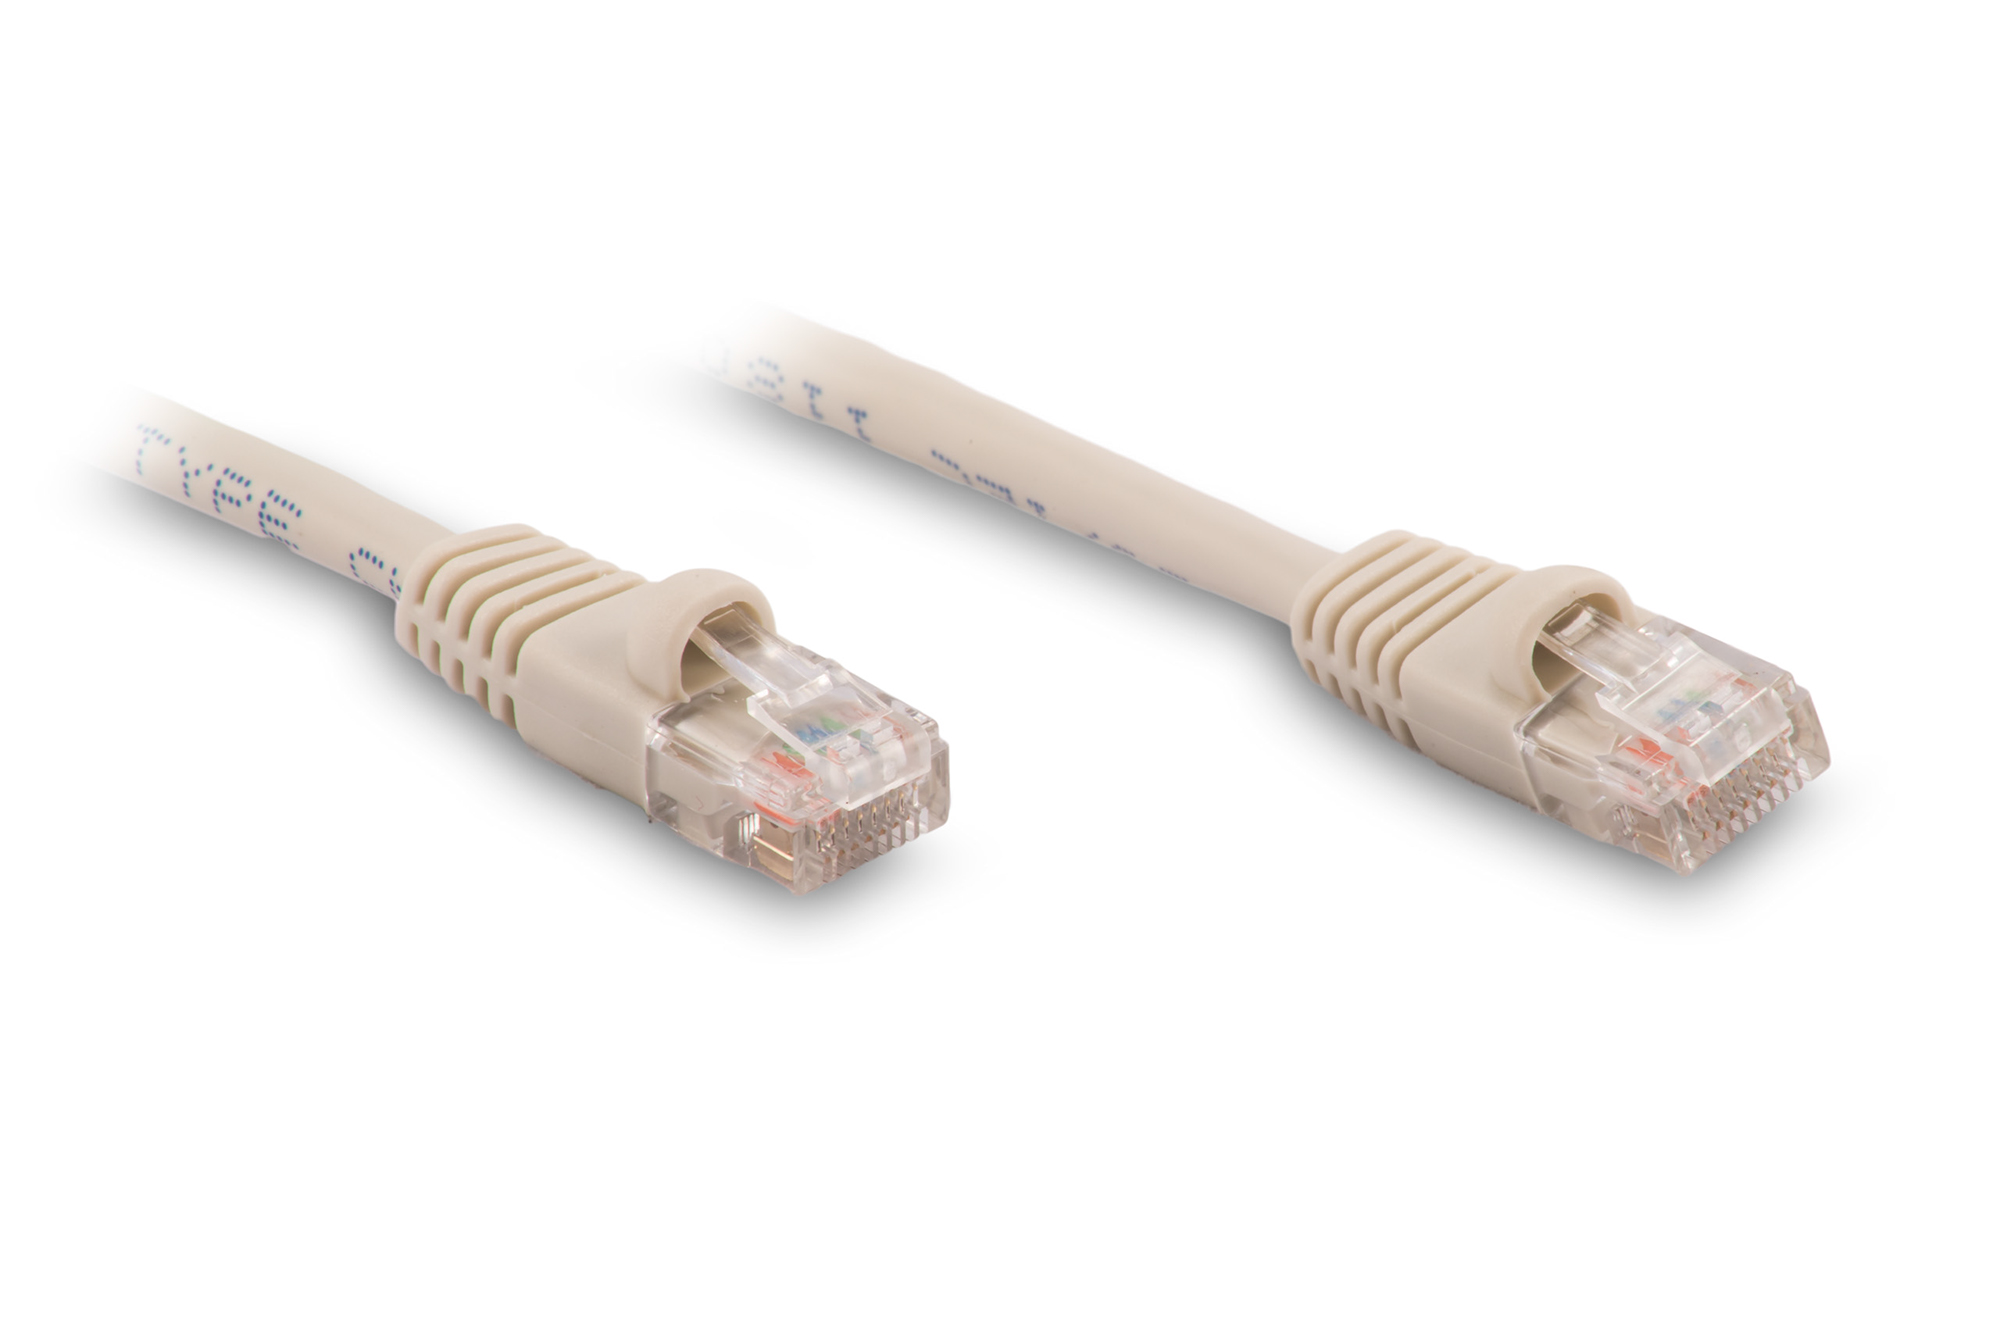 100ft Cat5e Ethernet Patch Cable - Gray Color - Snagless Boot, Stranded, RJ45, 350Mhz, 24AWG